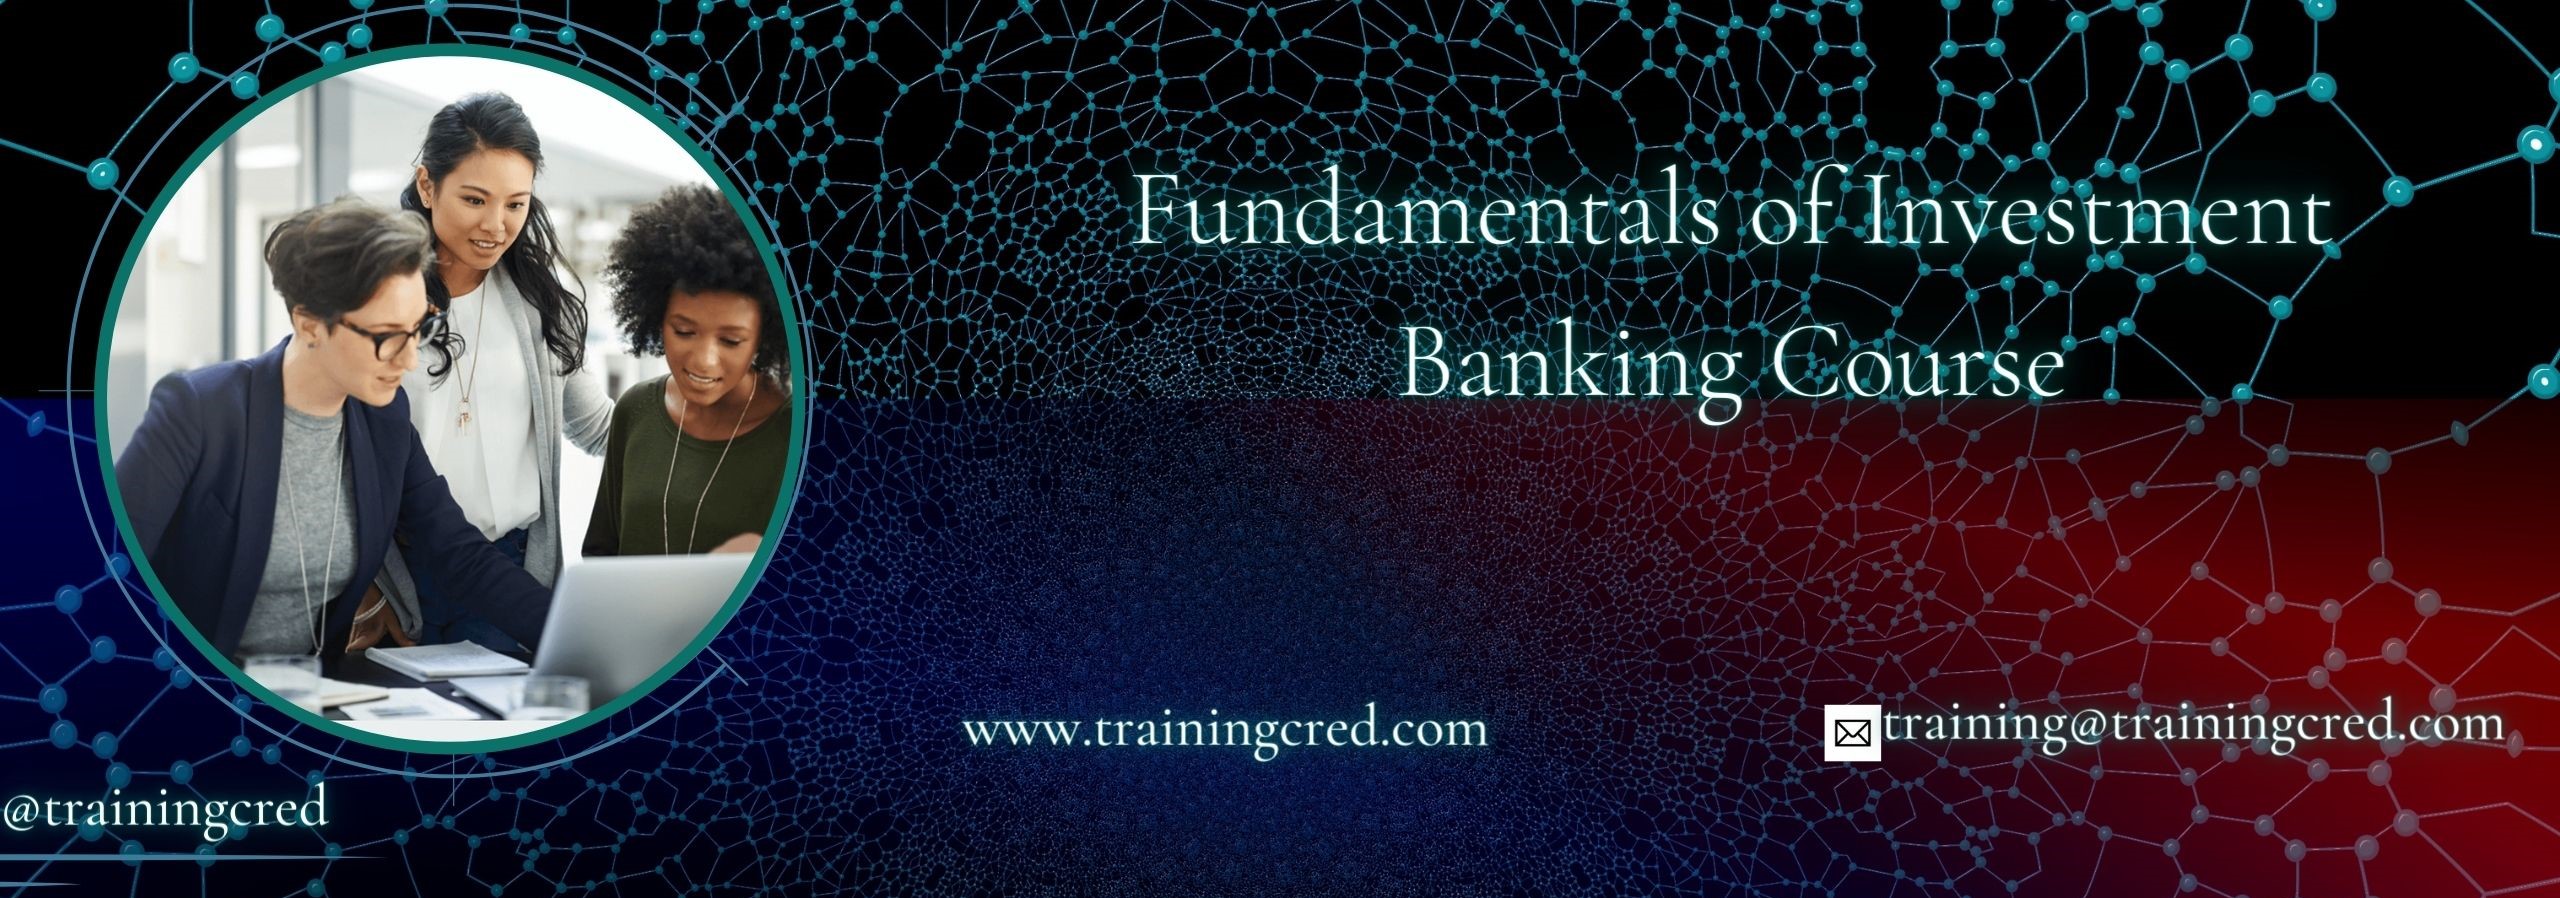 Fundamentals of Investment Banking Training